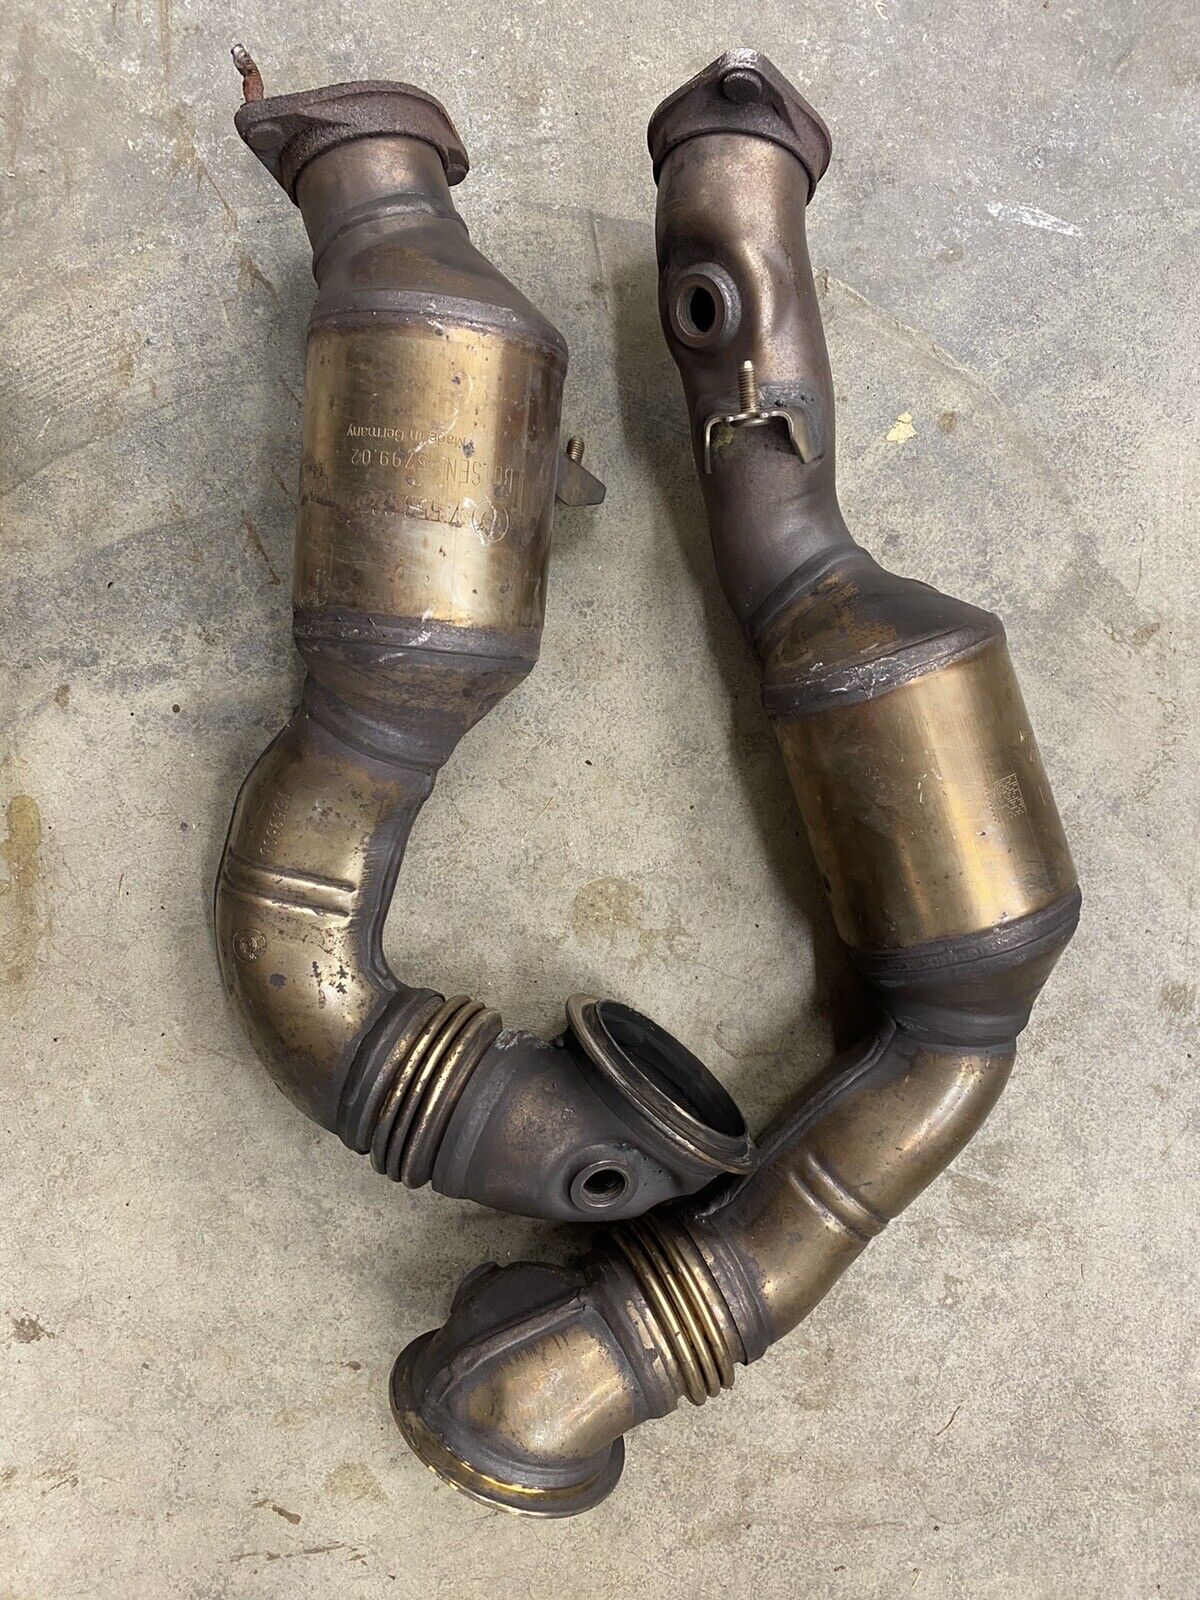 335xi catted downpipes (65,000 Miles)